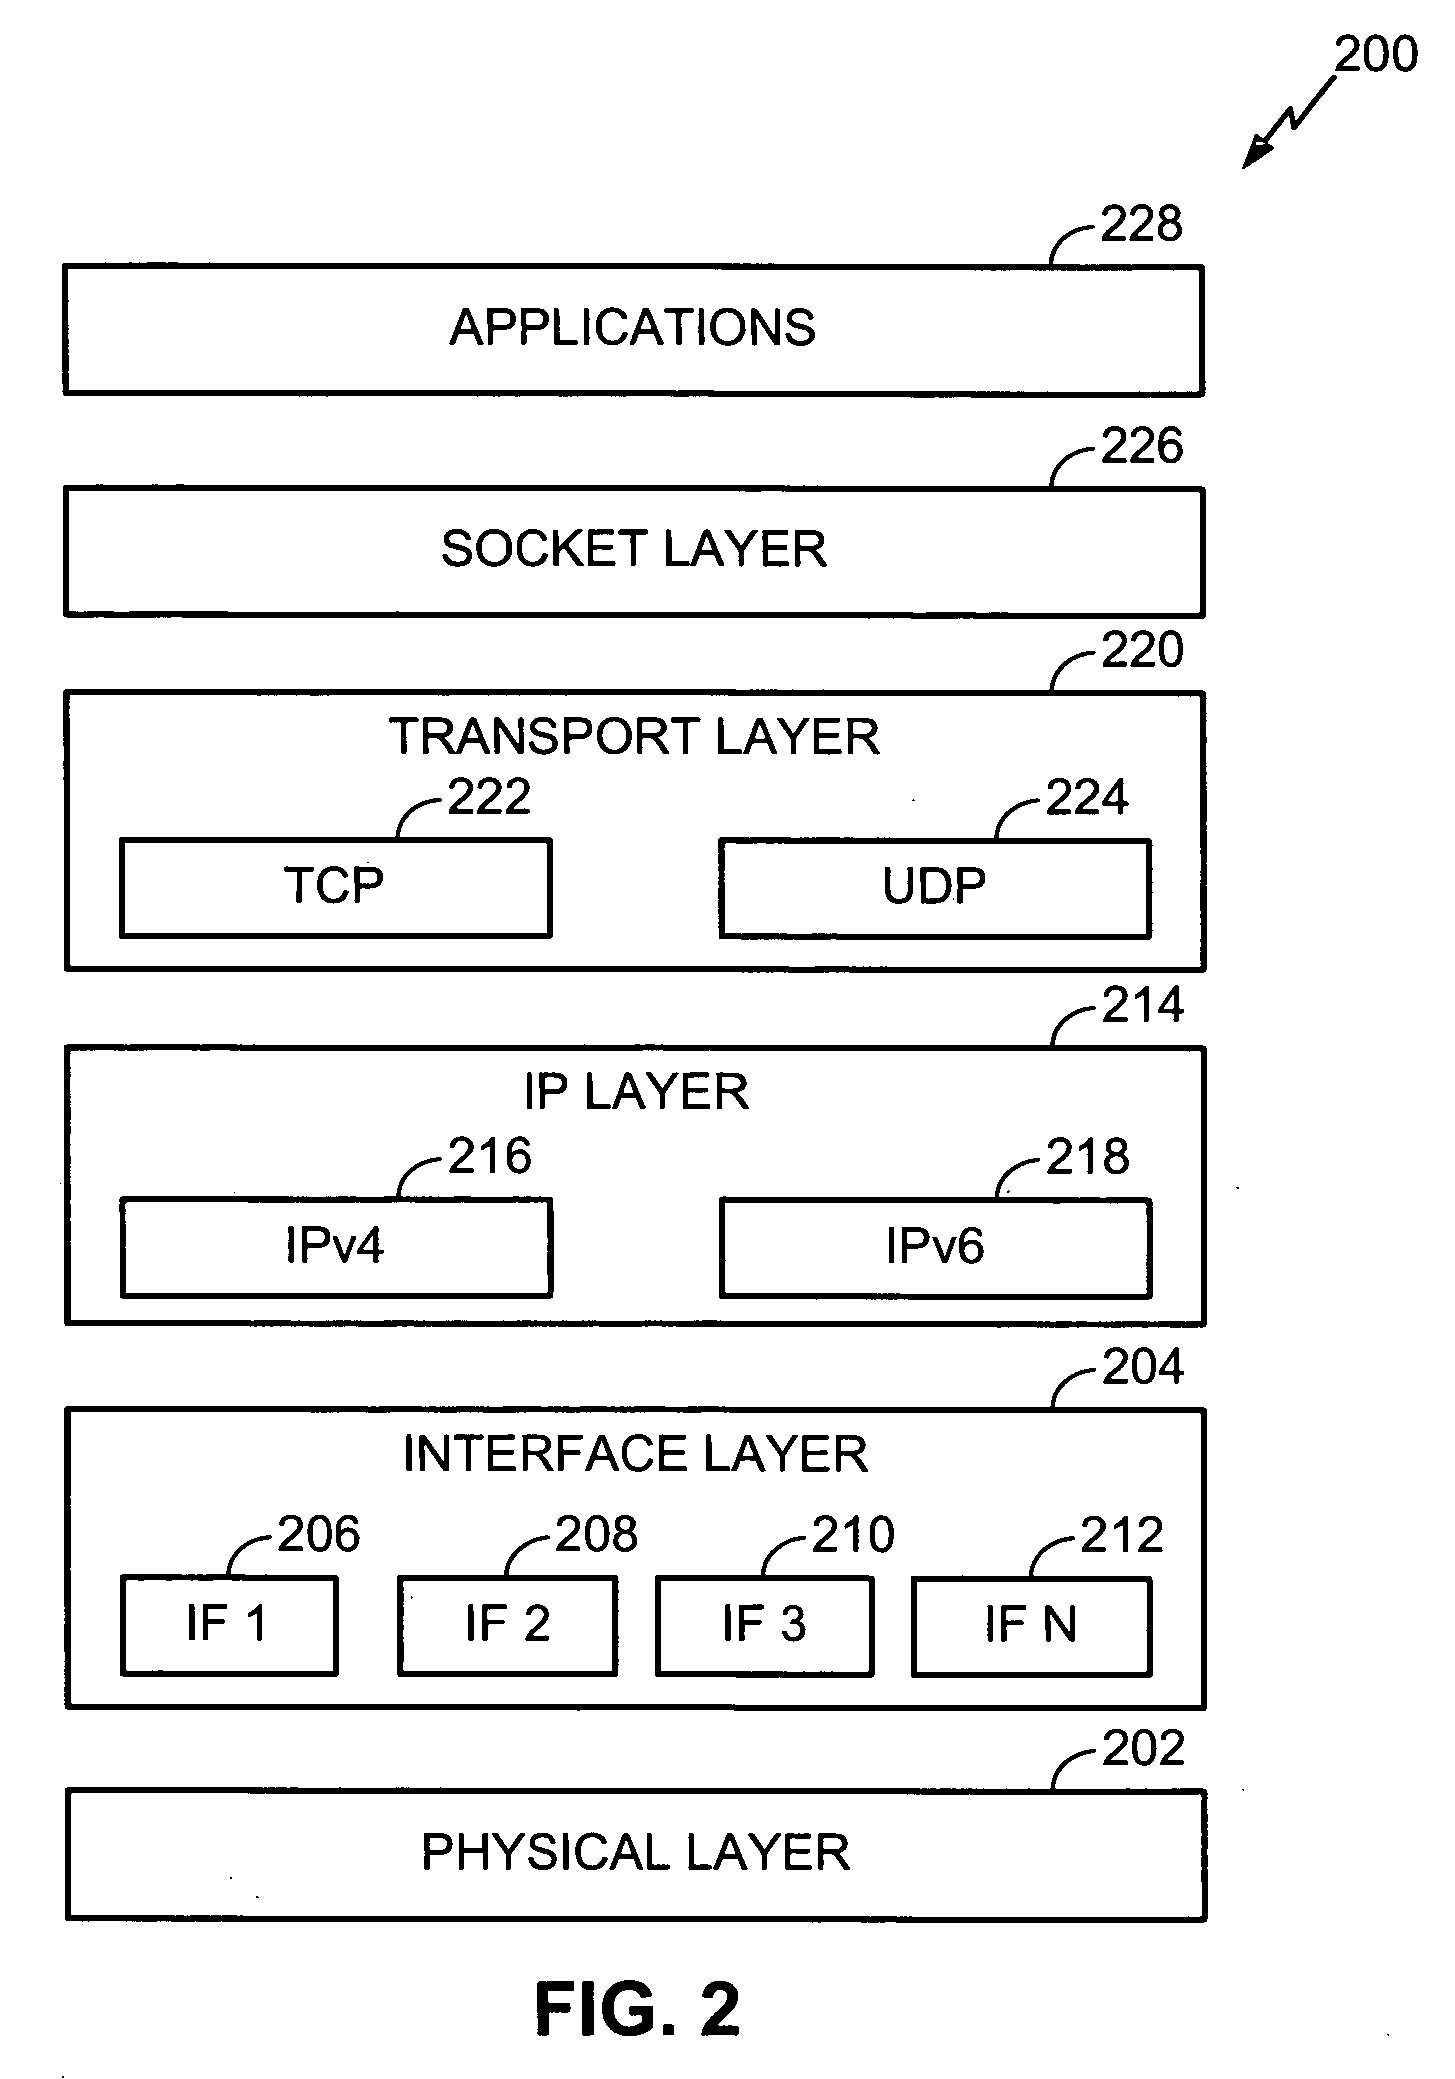 System and method to support data applications in a multi-homing, multi-mode communication device